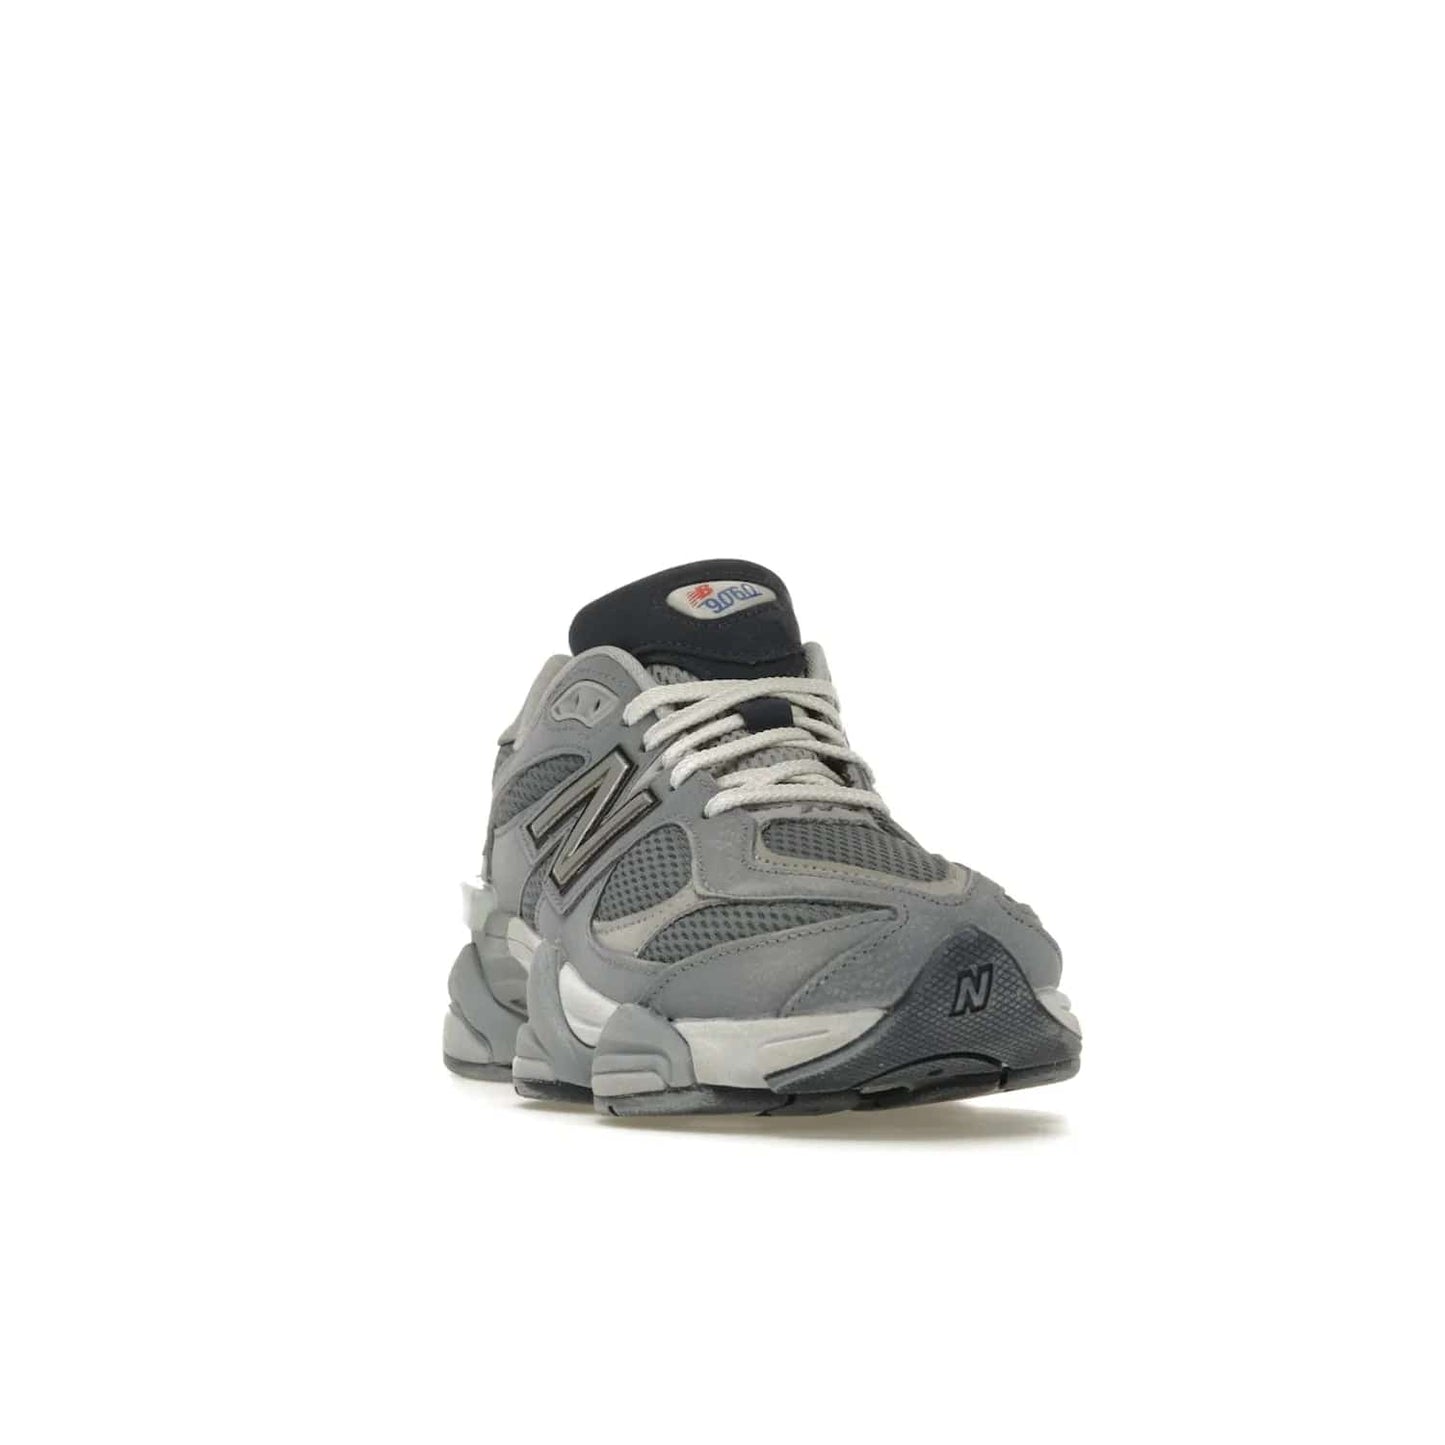 New Balance 9060 Grey Day (2023) - Image 8 - Only at www.BallersClubKickz.com - #
Sporty-meets-stylish in the New Balance 9060 Grey Day sneaker. Designed with Arctic Grey, Steel, and Silver Metallic, it offers an edgy but wearable look along with classic NB comfort and quality.